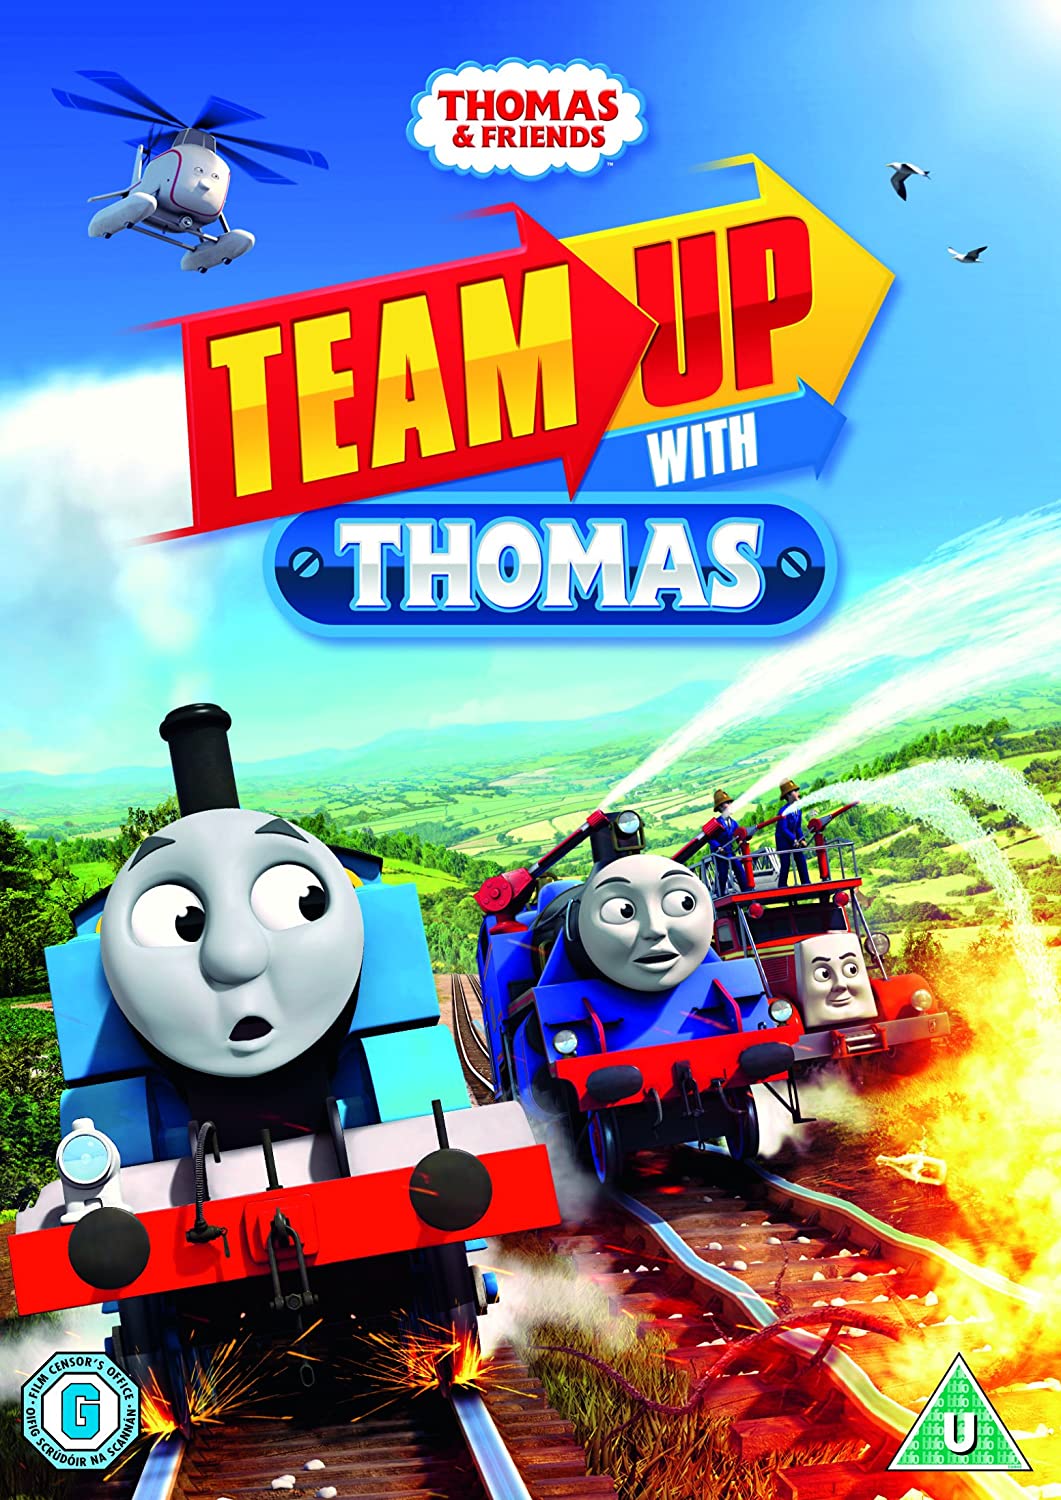 Thomas The Tank Engine And Friends: Team Up With Thomas - Family [DVD]